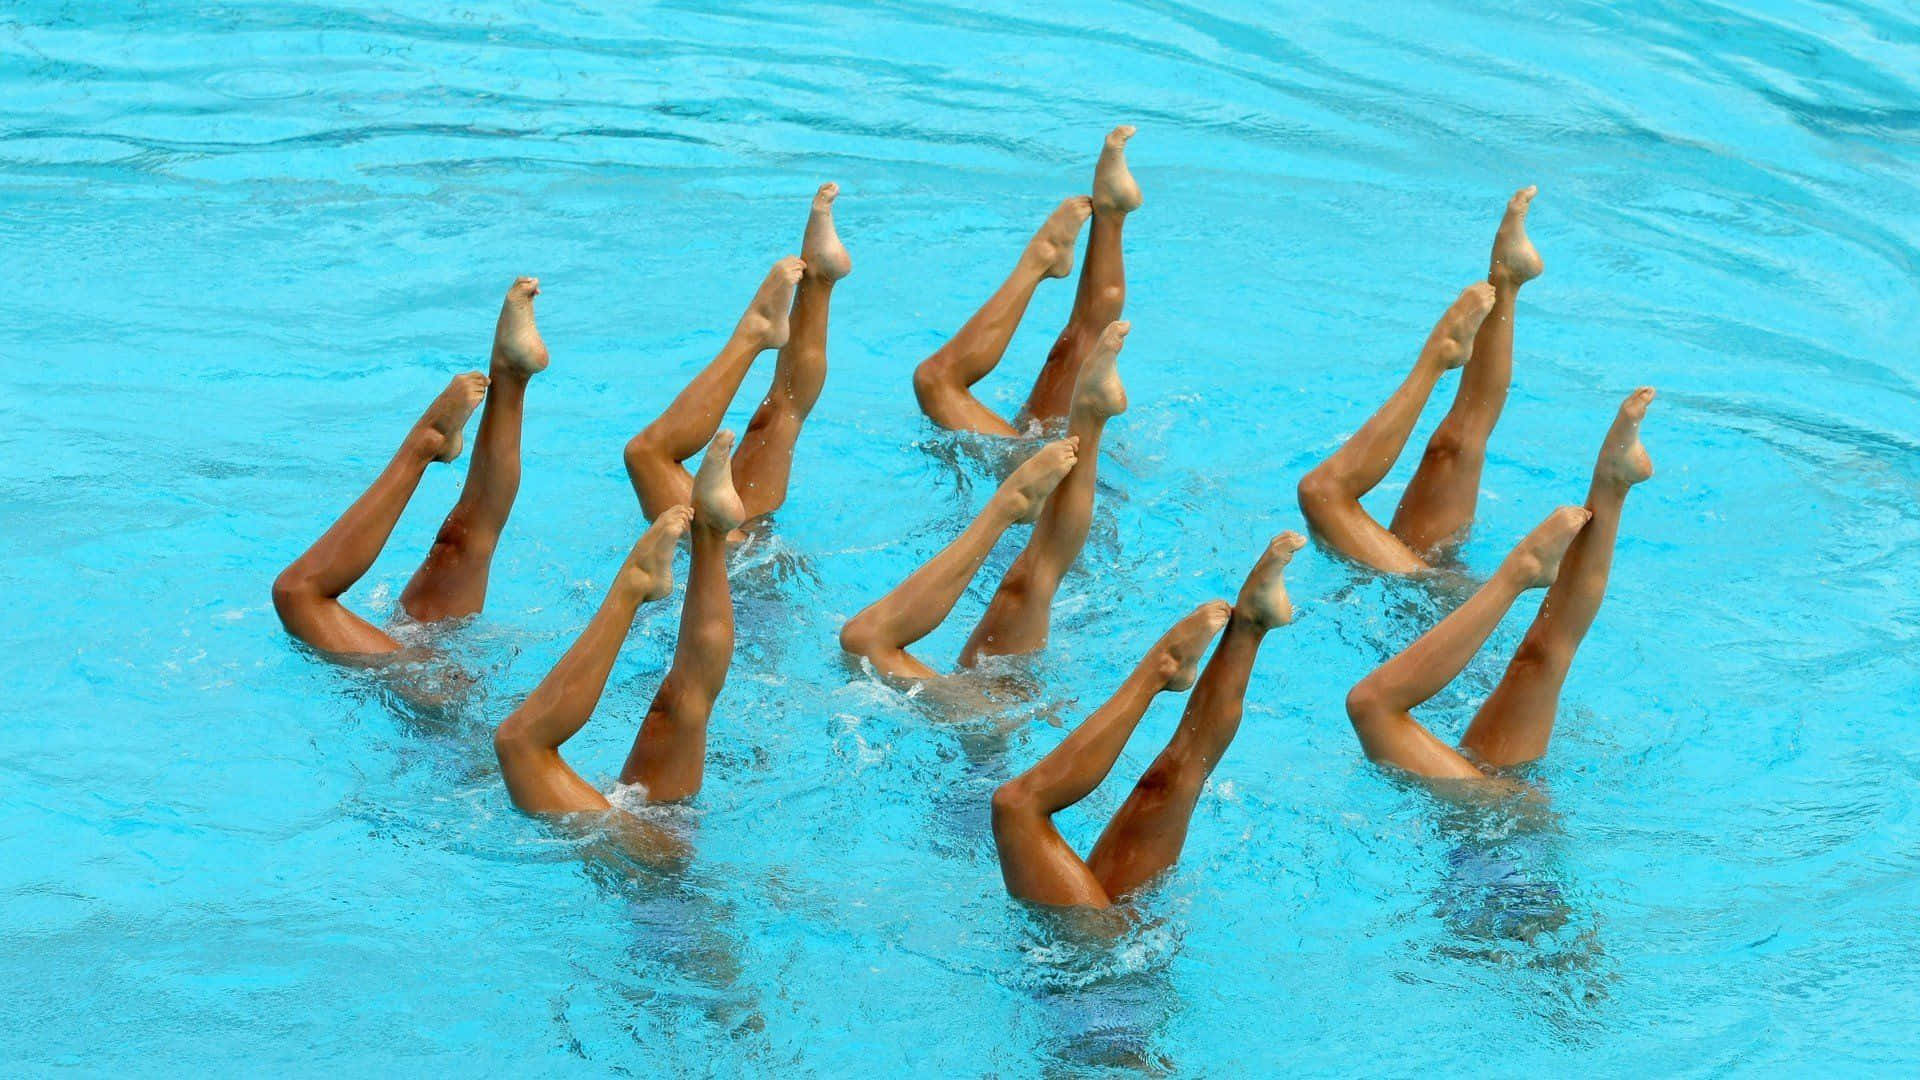 A Group Of People In A Pool With Their Legs Extended